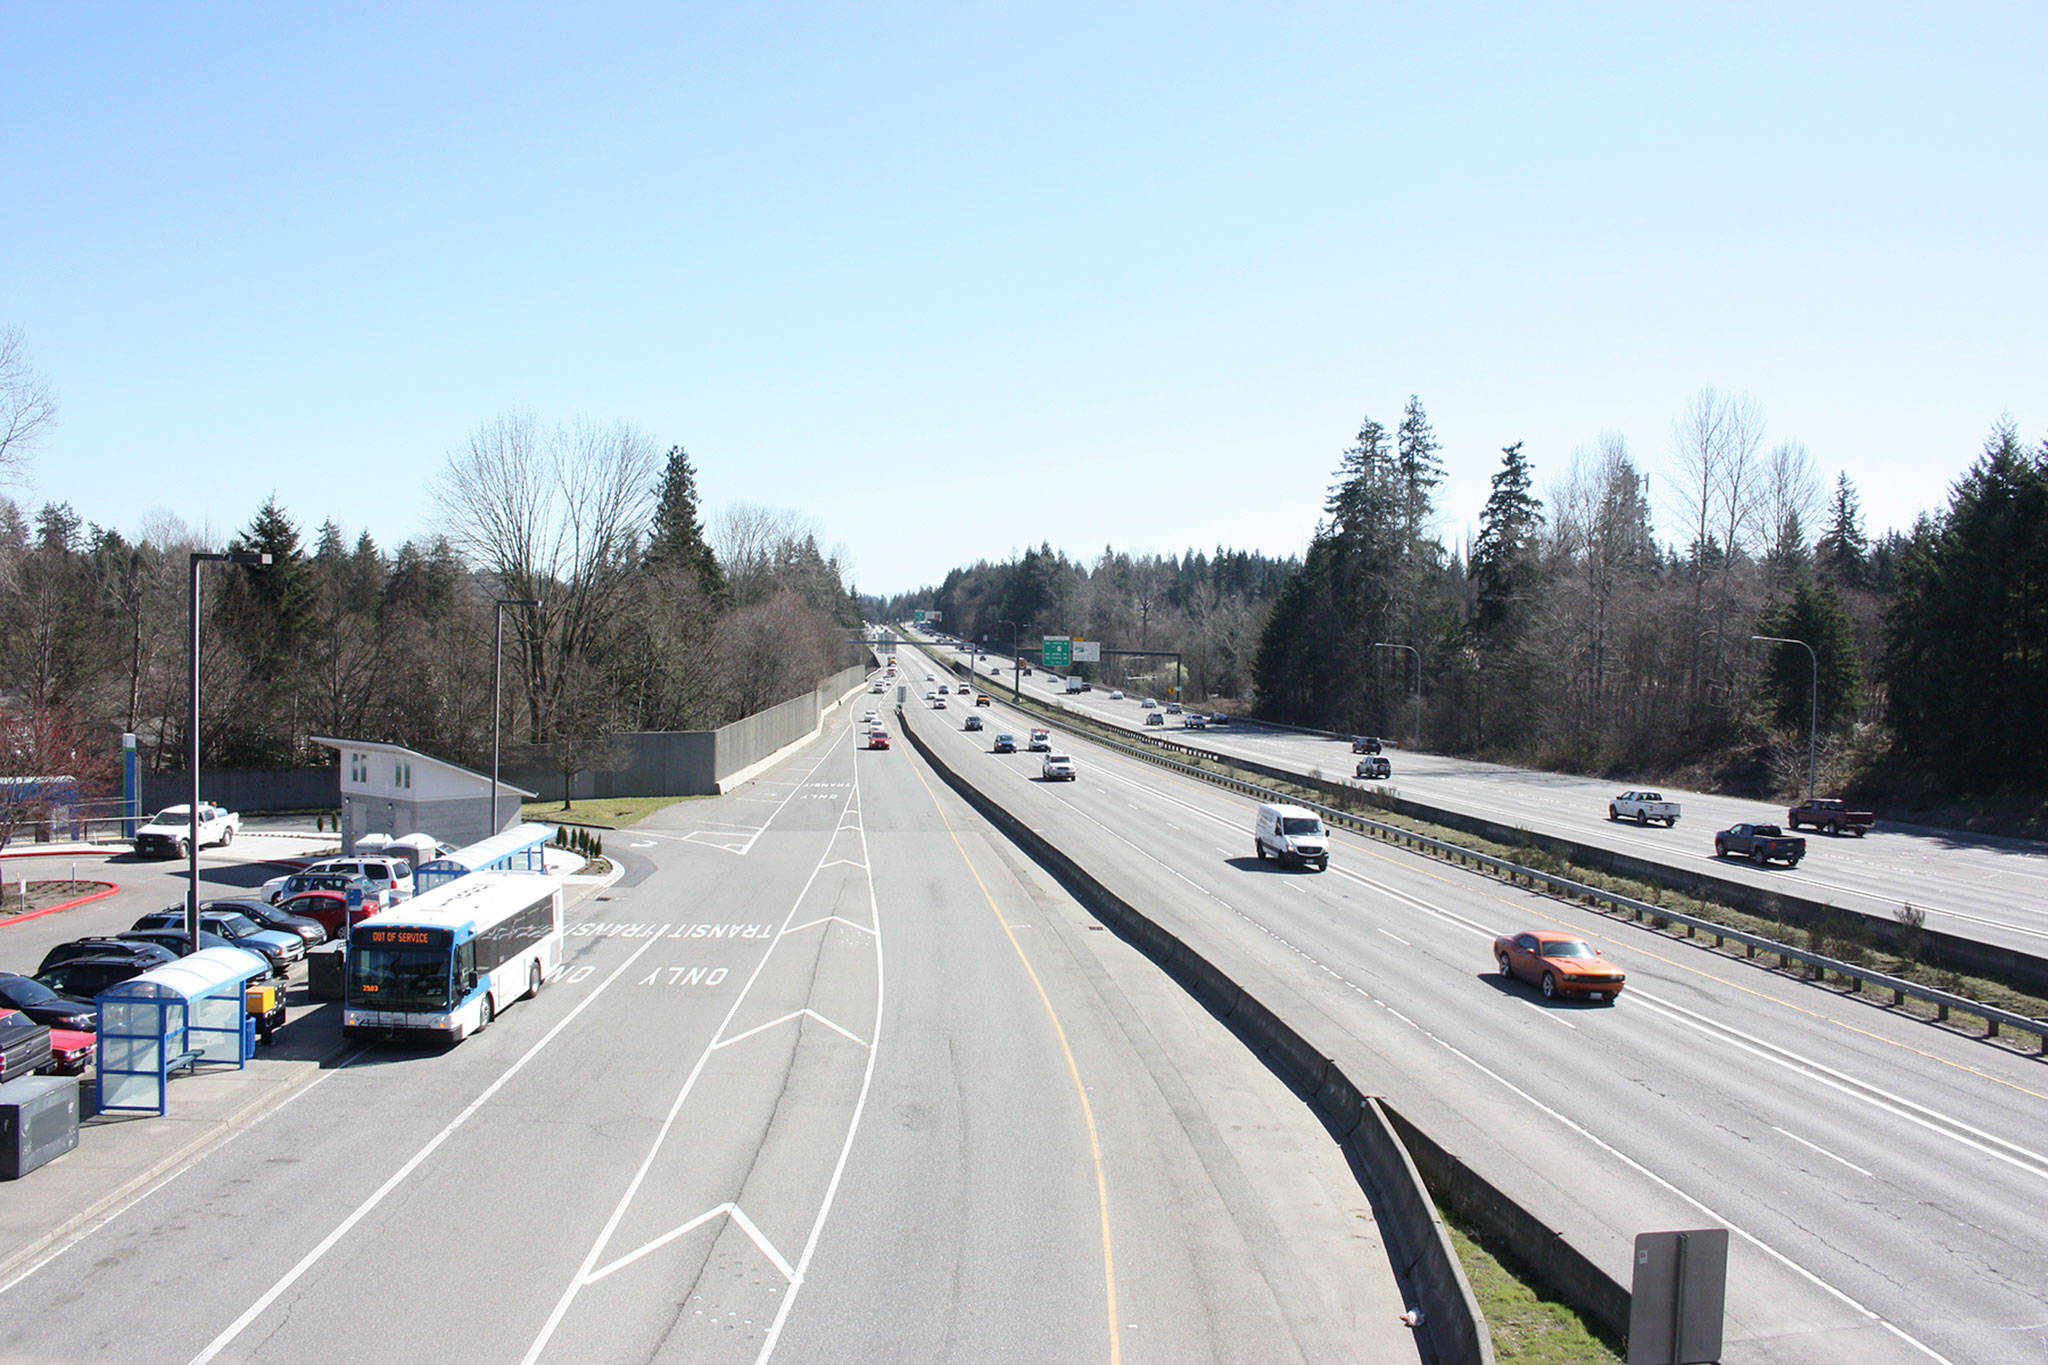 The single-lane section of the I-405 express toll lanes between SR 522 and I-5 continues to experience congestion, particularly southbound in the morning commute. This is the view south from the bridge over the I-405/527 interchange in the early afternoon. Katie Metzger/staff photo